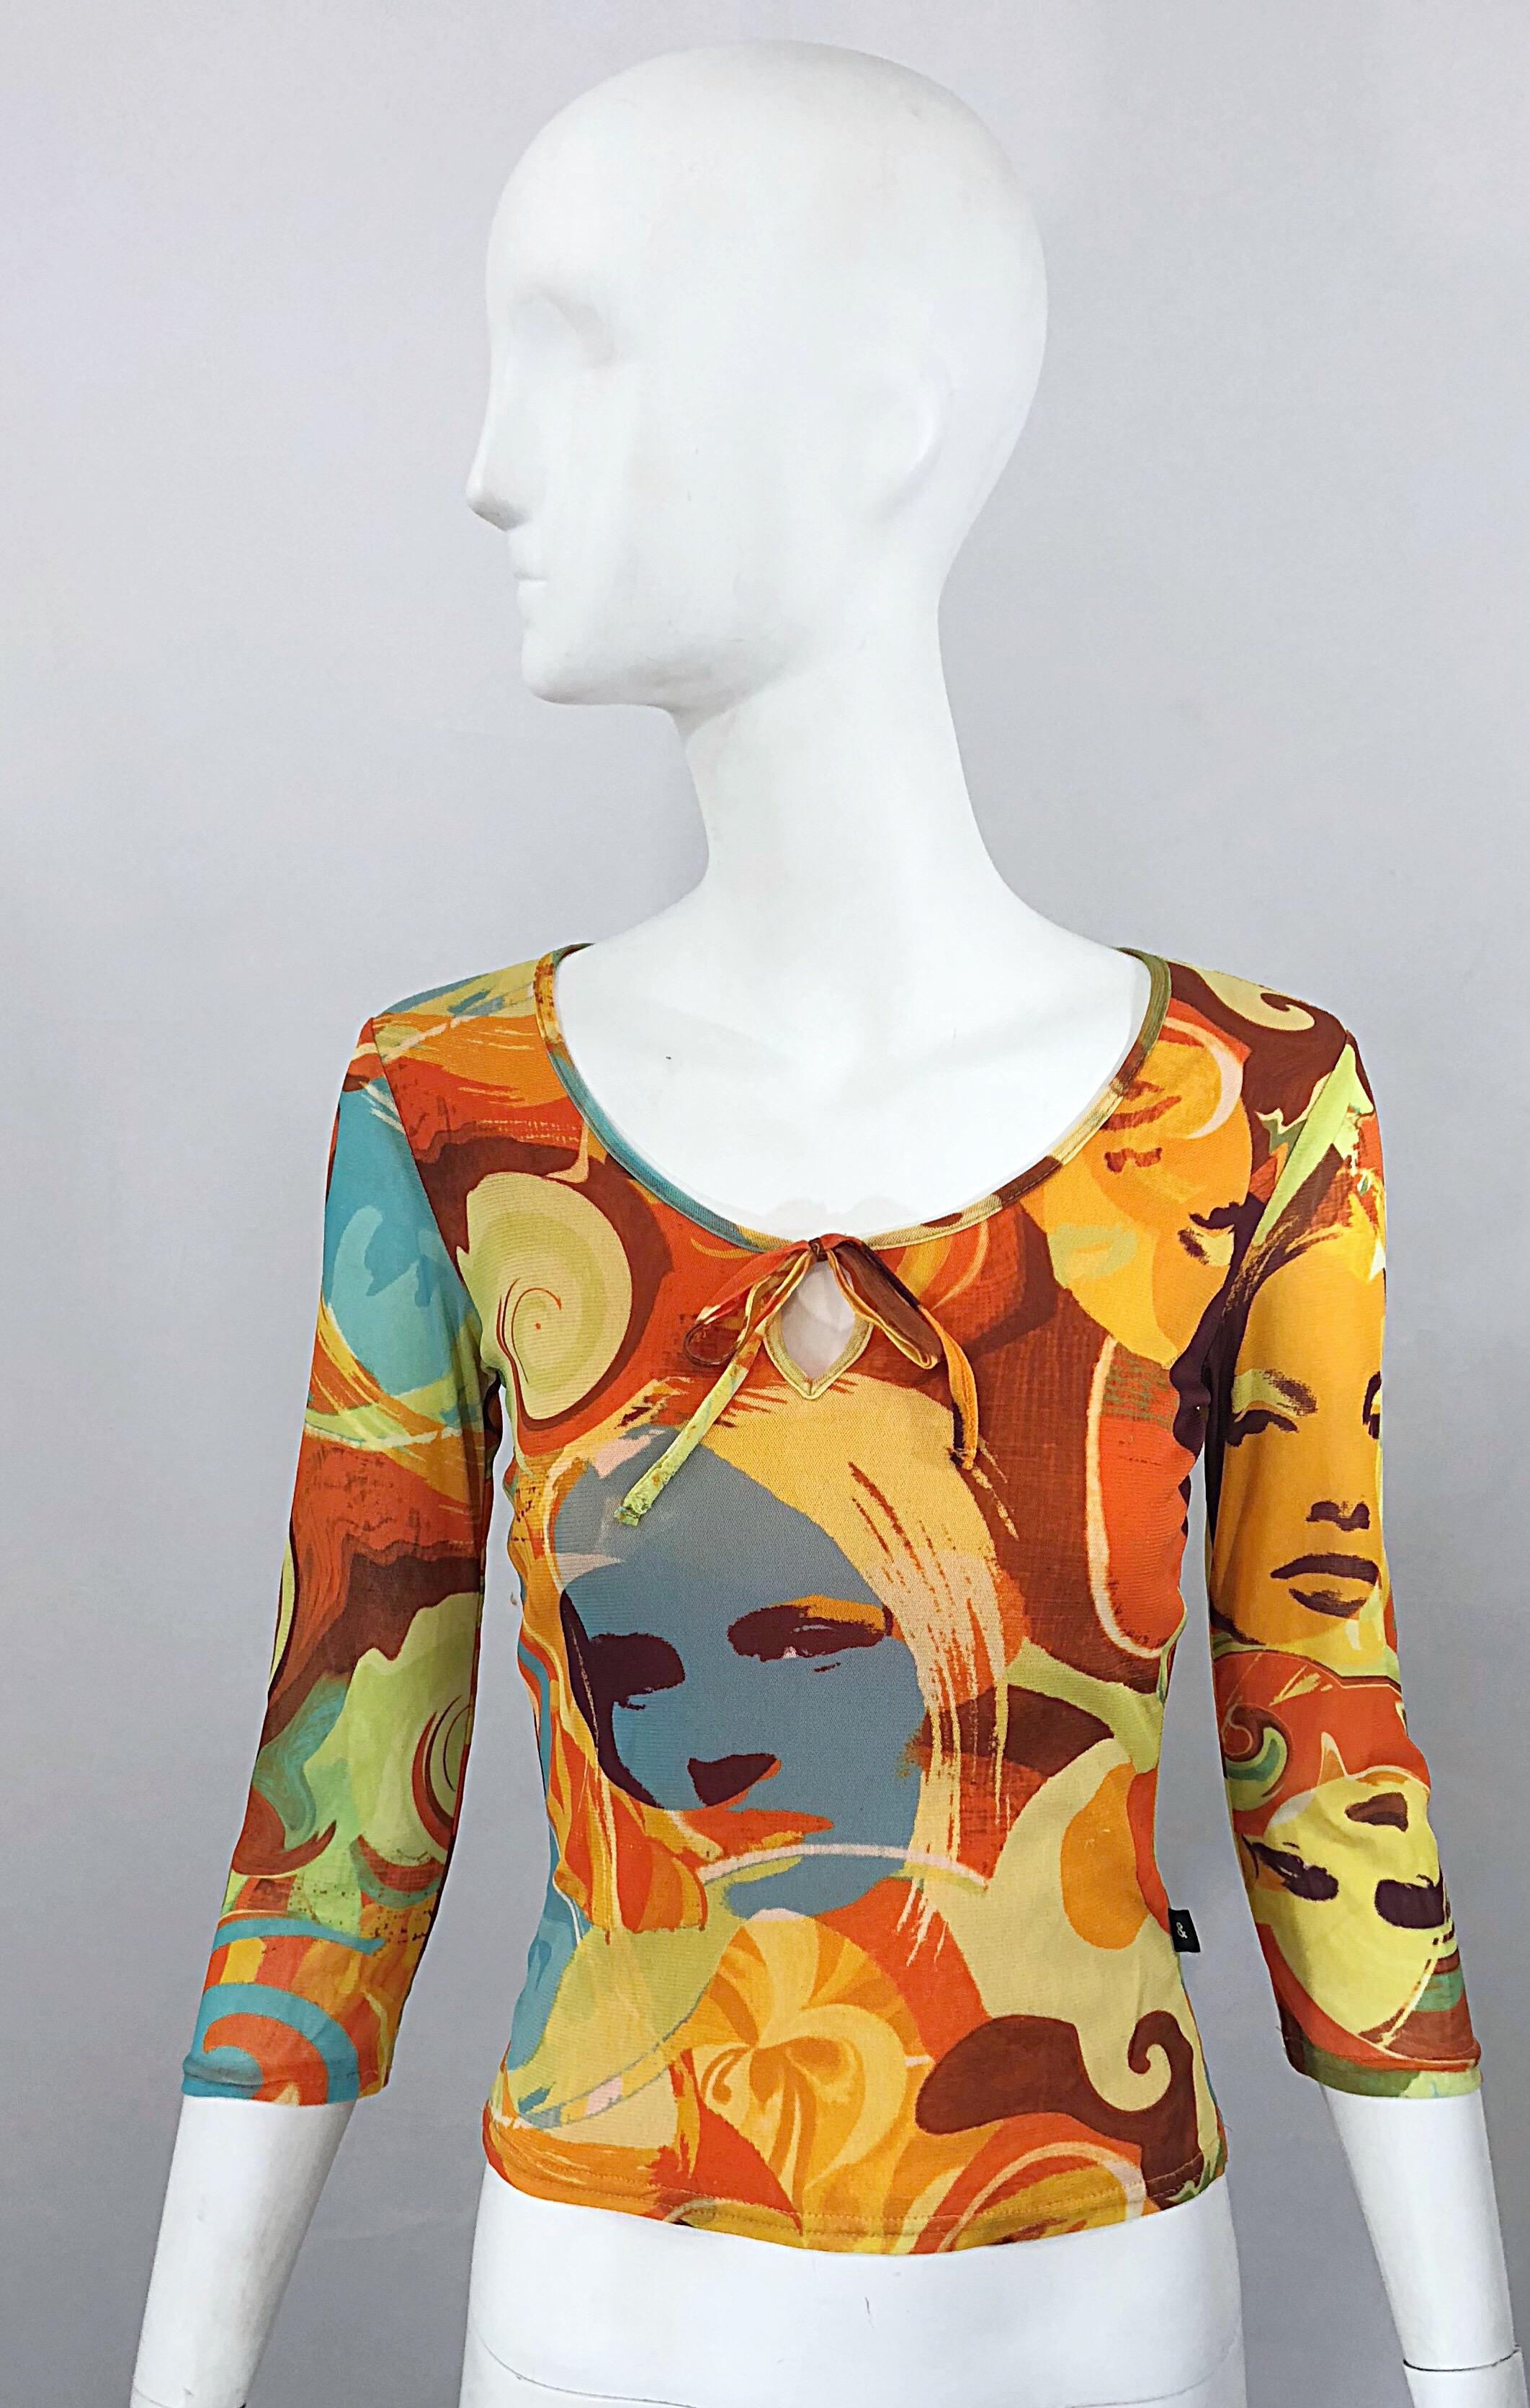 Amazing 90s does 70s French made novelty print 'Covergirl' themed 3/4 sleeves mesh top! Features vibrant warm tones in yellow, orange, blue, green and brown throughout, with impressive bold prints. Ties at center neck can be worn in a bow or hung